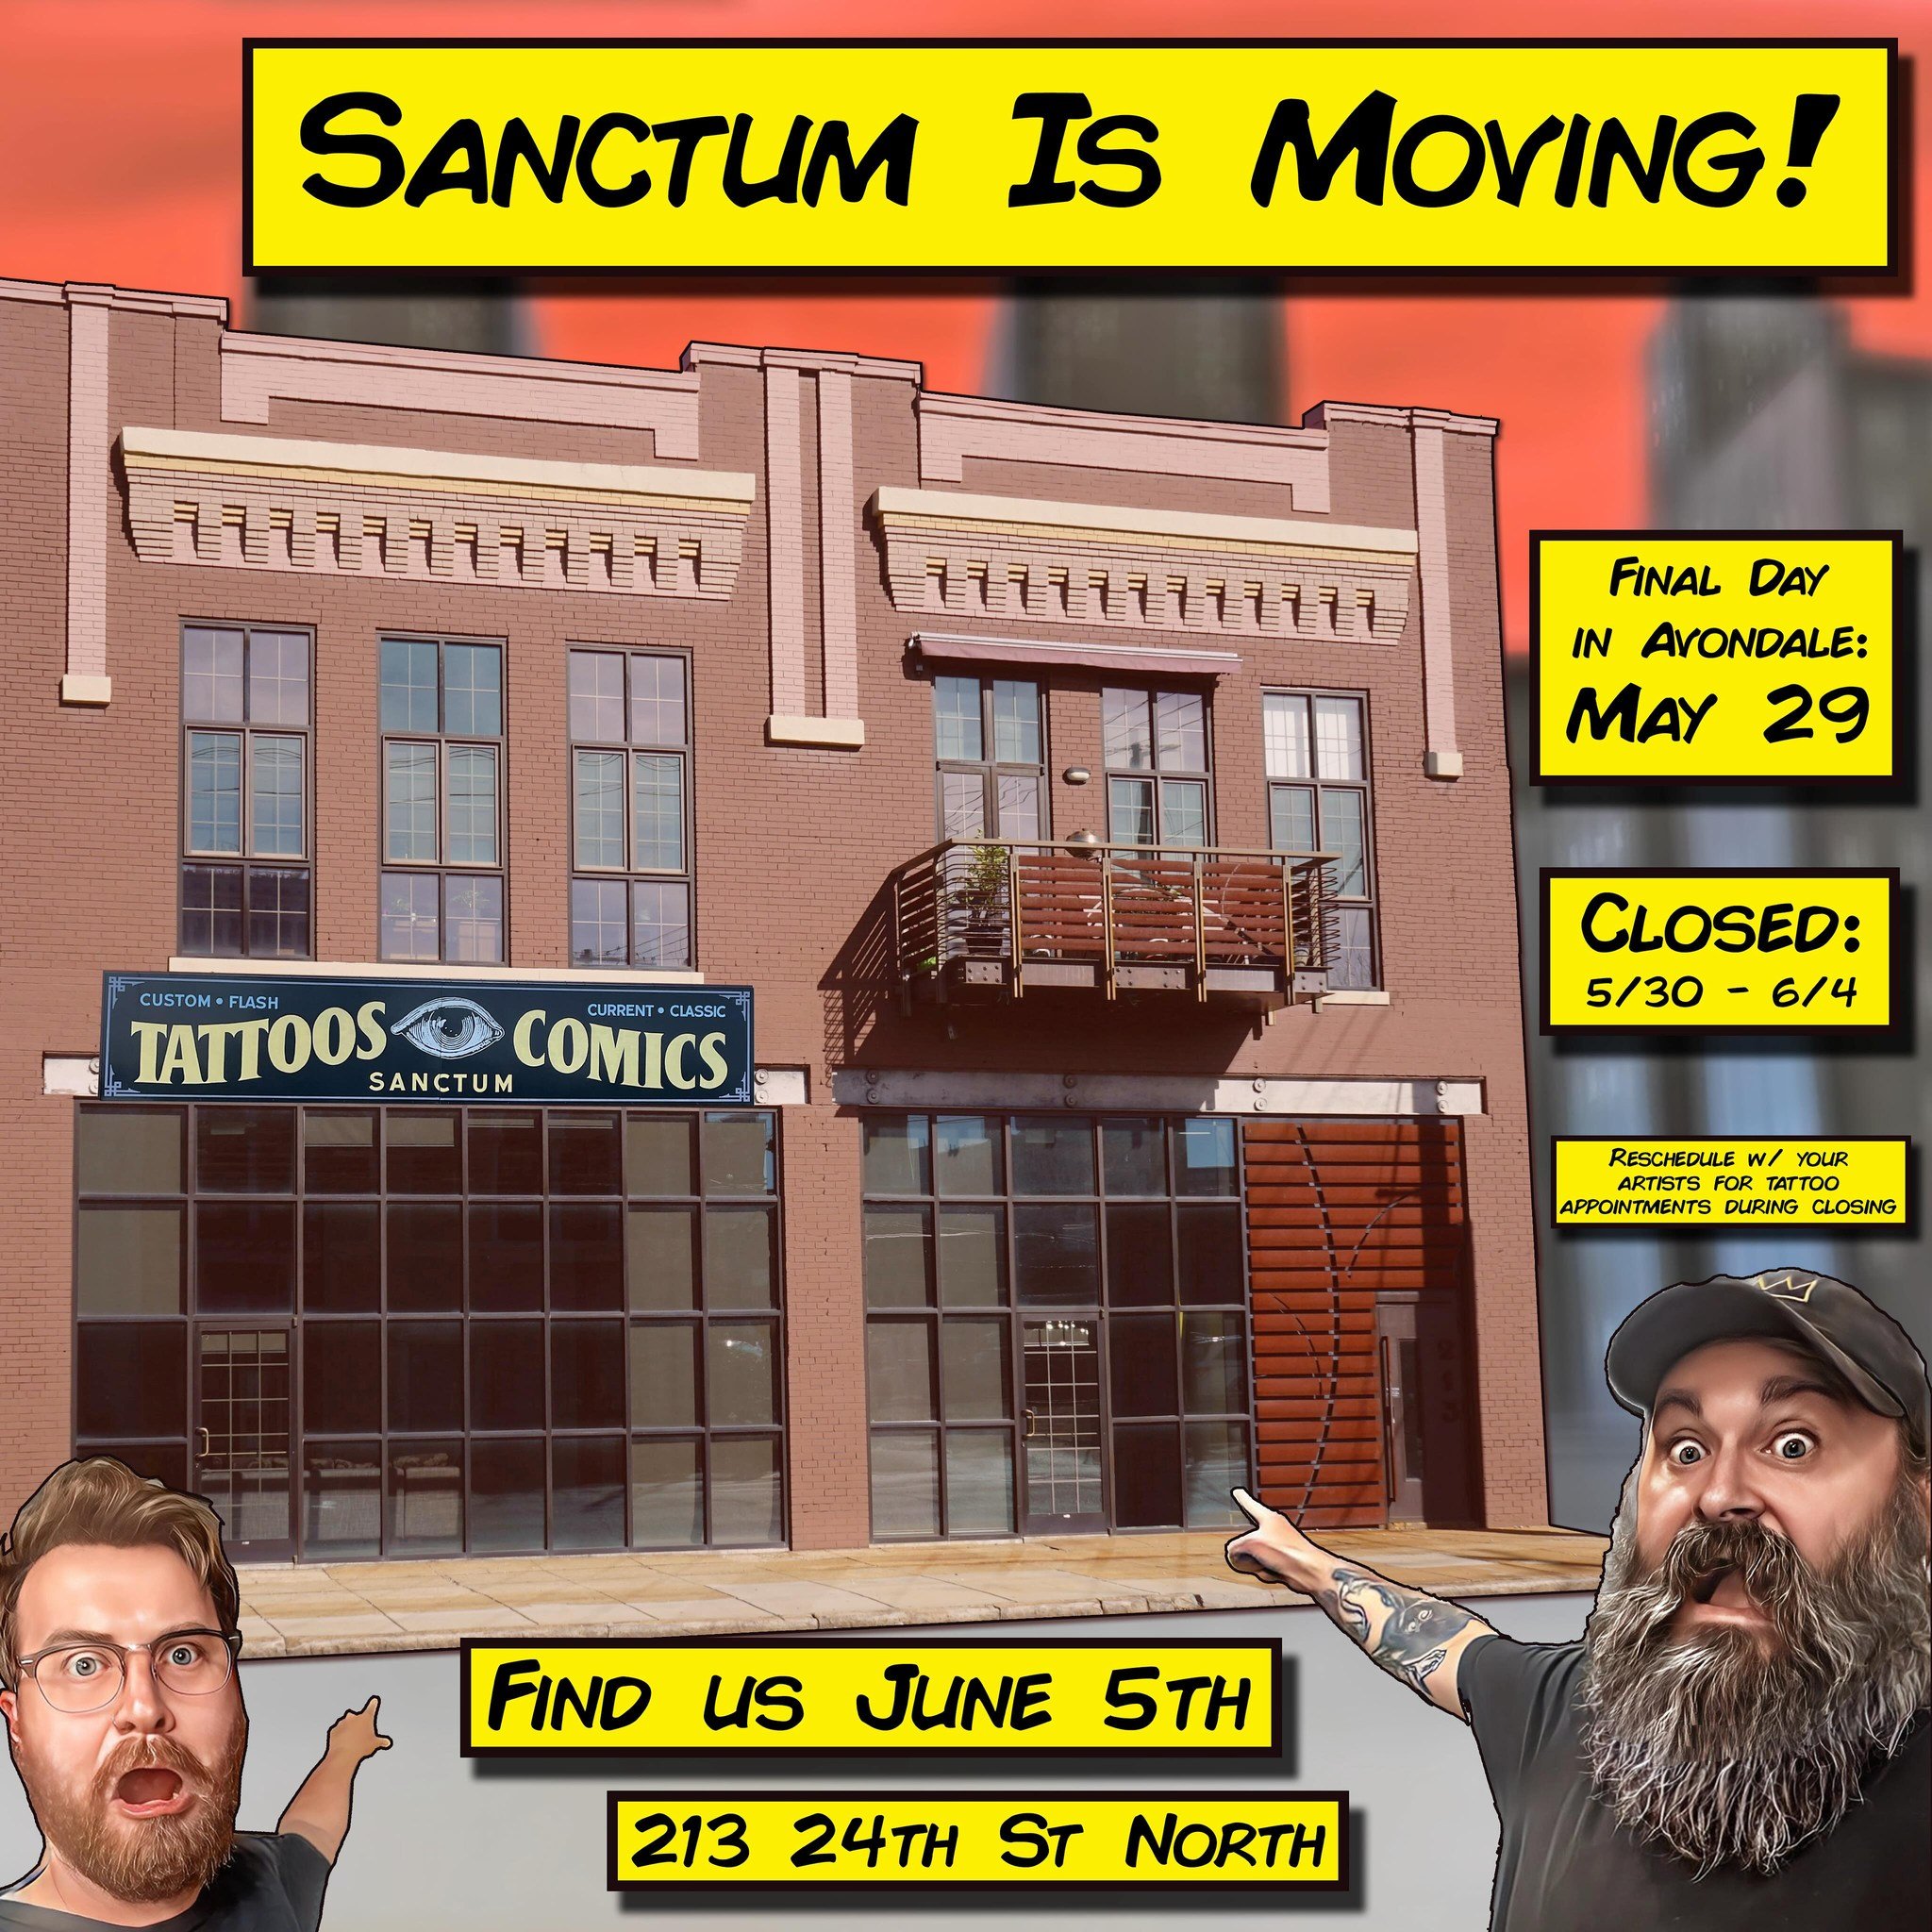 🚨 Sanctum is moving!

💥 Final day in Avondale: May 29
💥 Closed: 05/30 - 06/4
💥 Reopening: June 5
💥 New Address: 213 24th Street North

💺 If you have a tattoo appointment during our closing dates, please contact your artist to reschedule.